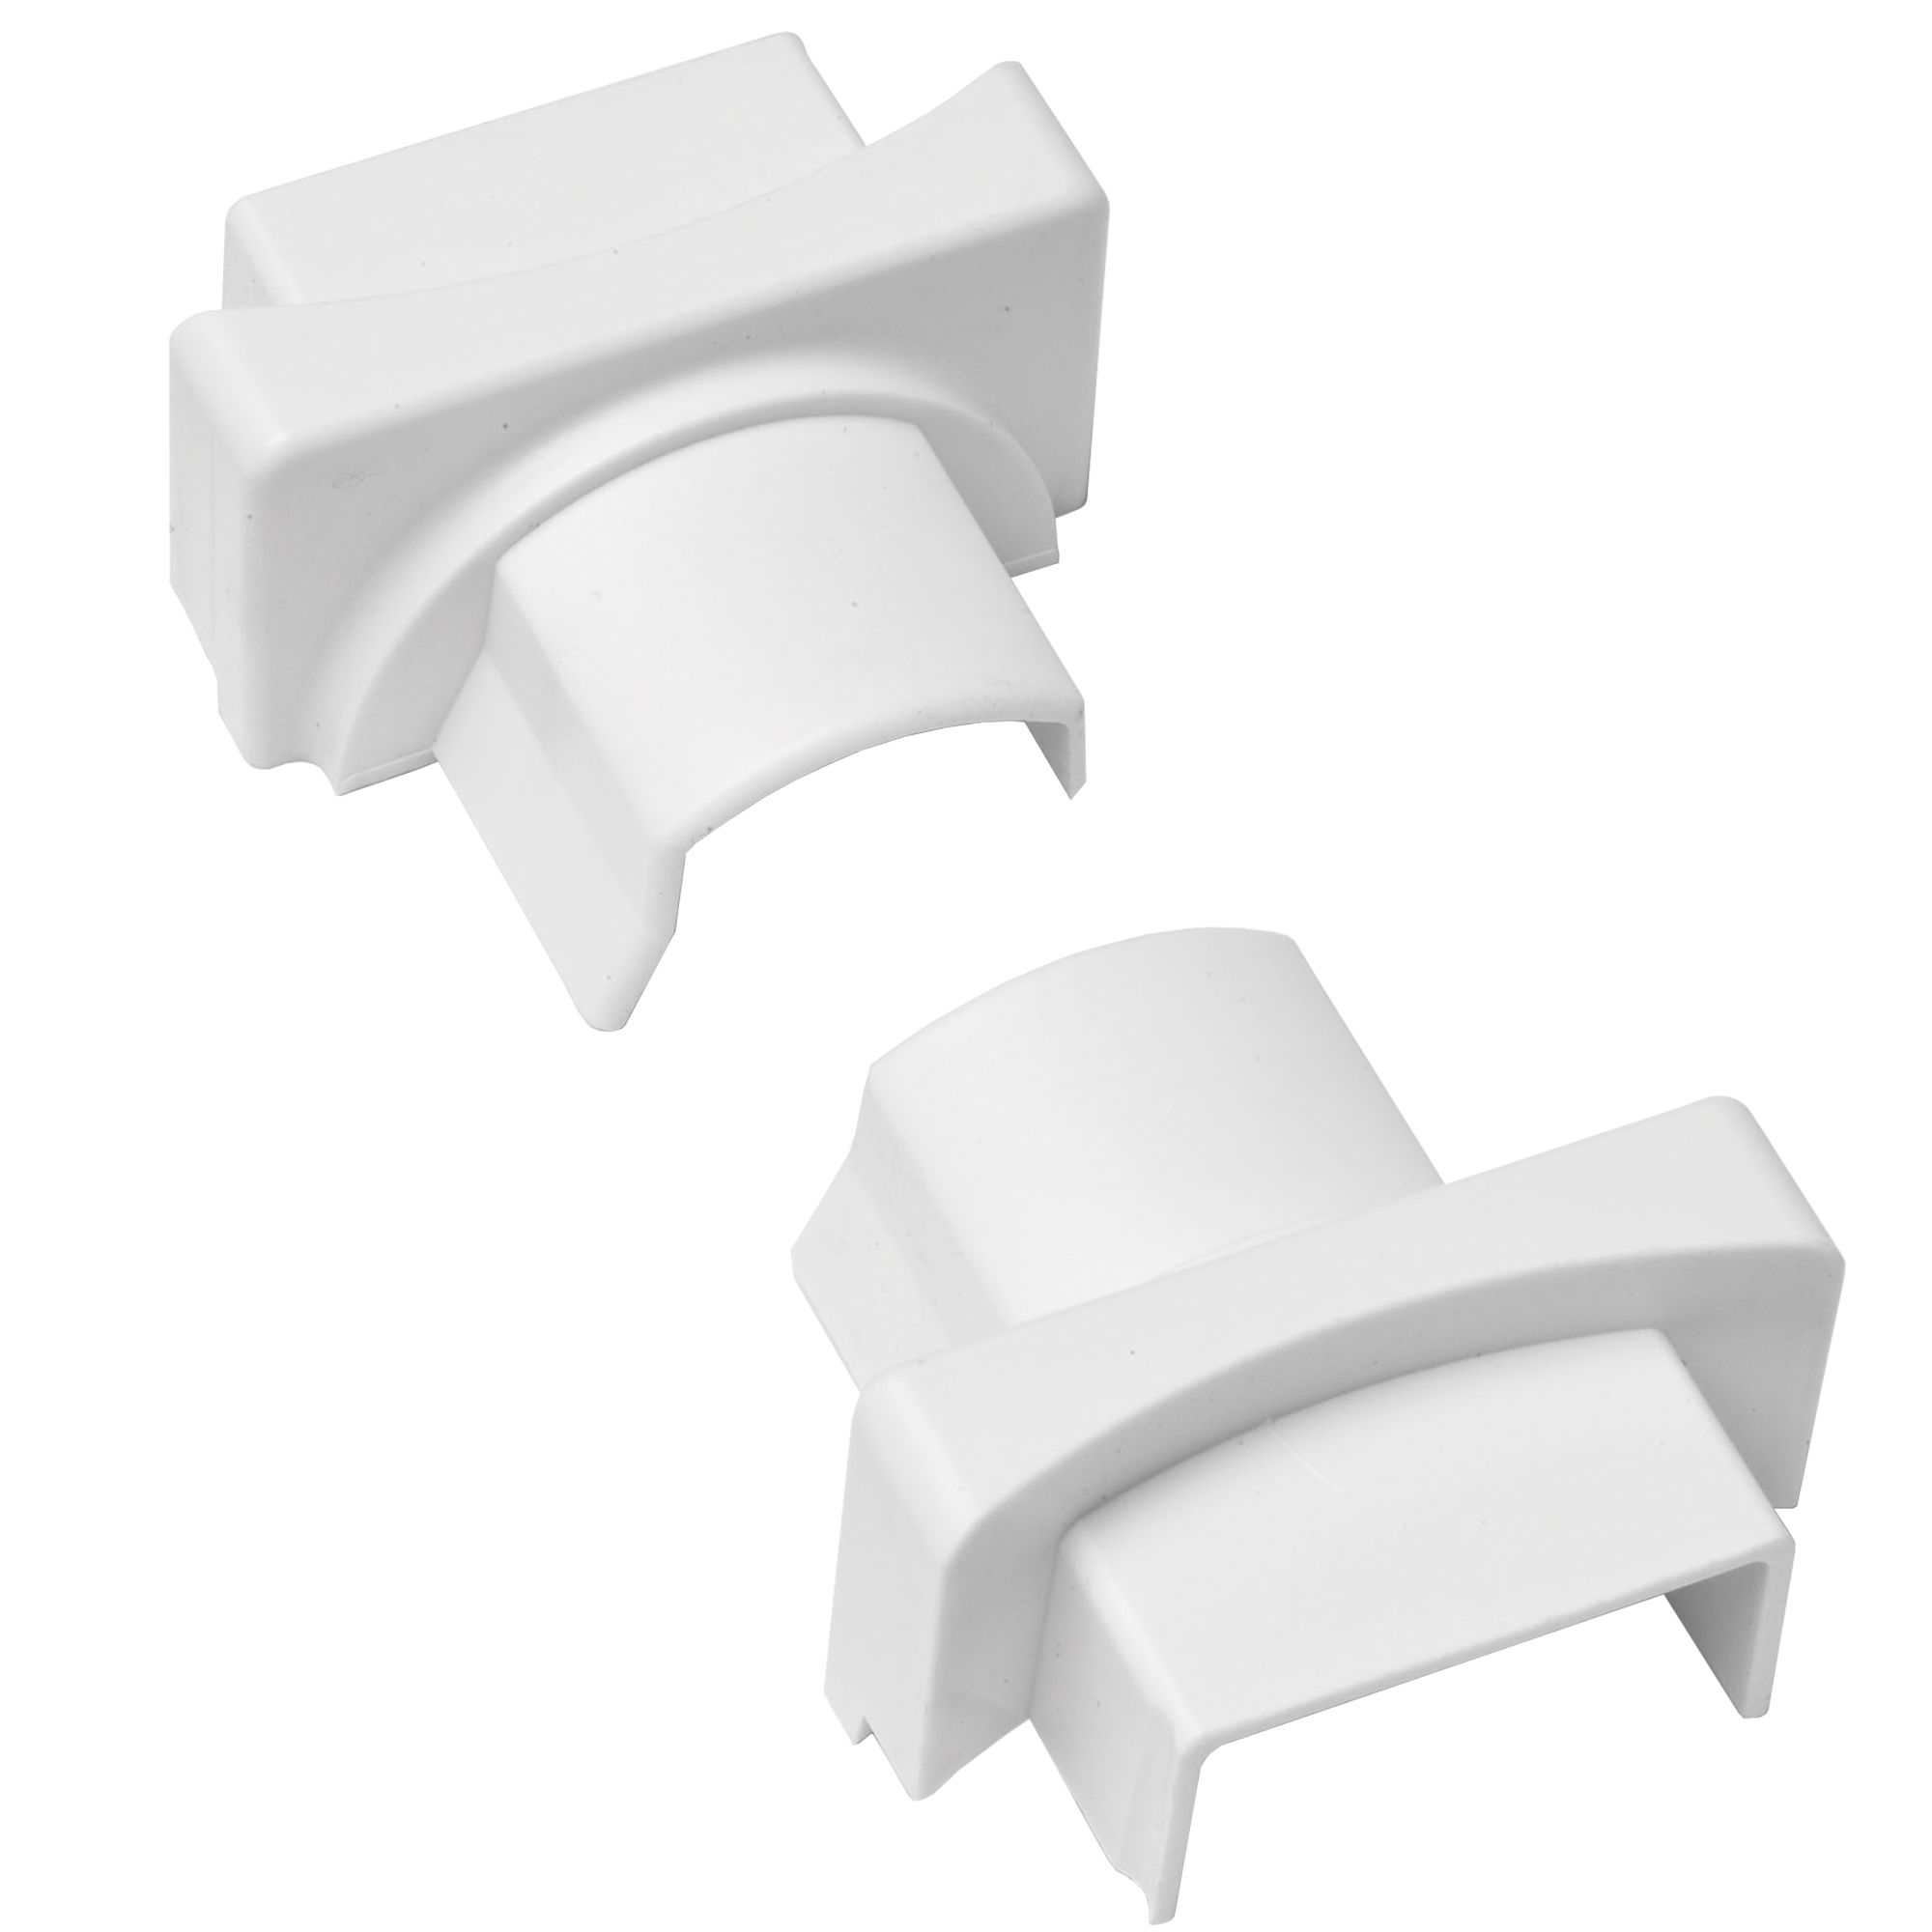 D Line Abs Plastic Pattress Adaptor, Pack Of 2